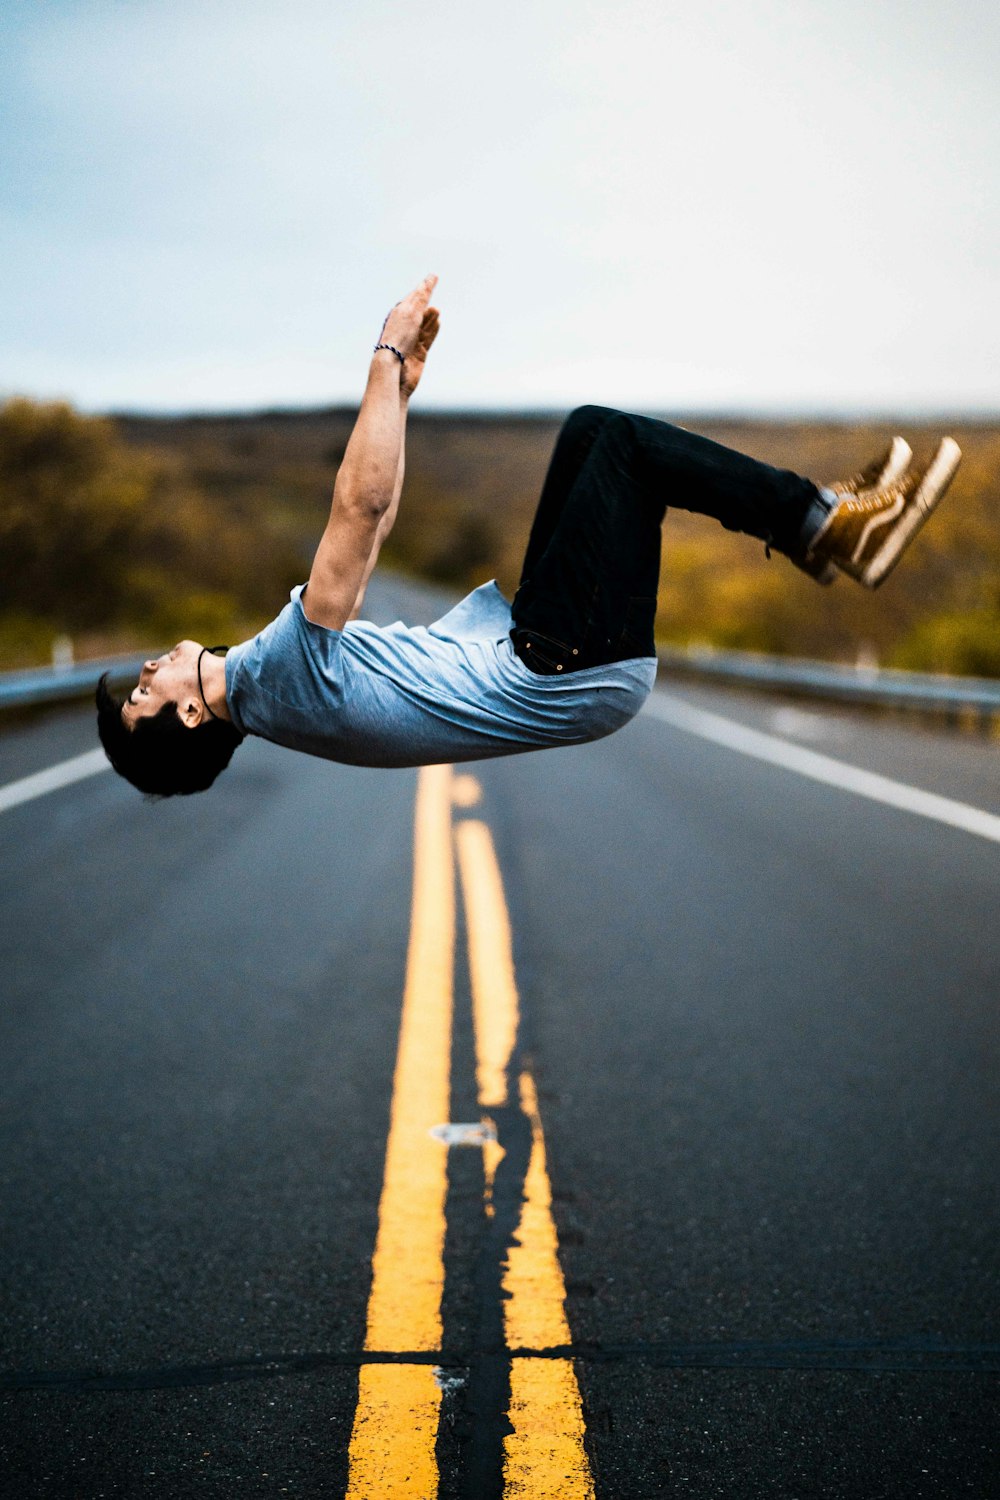 man backflipping in the middle of the road